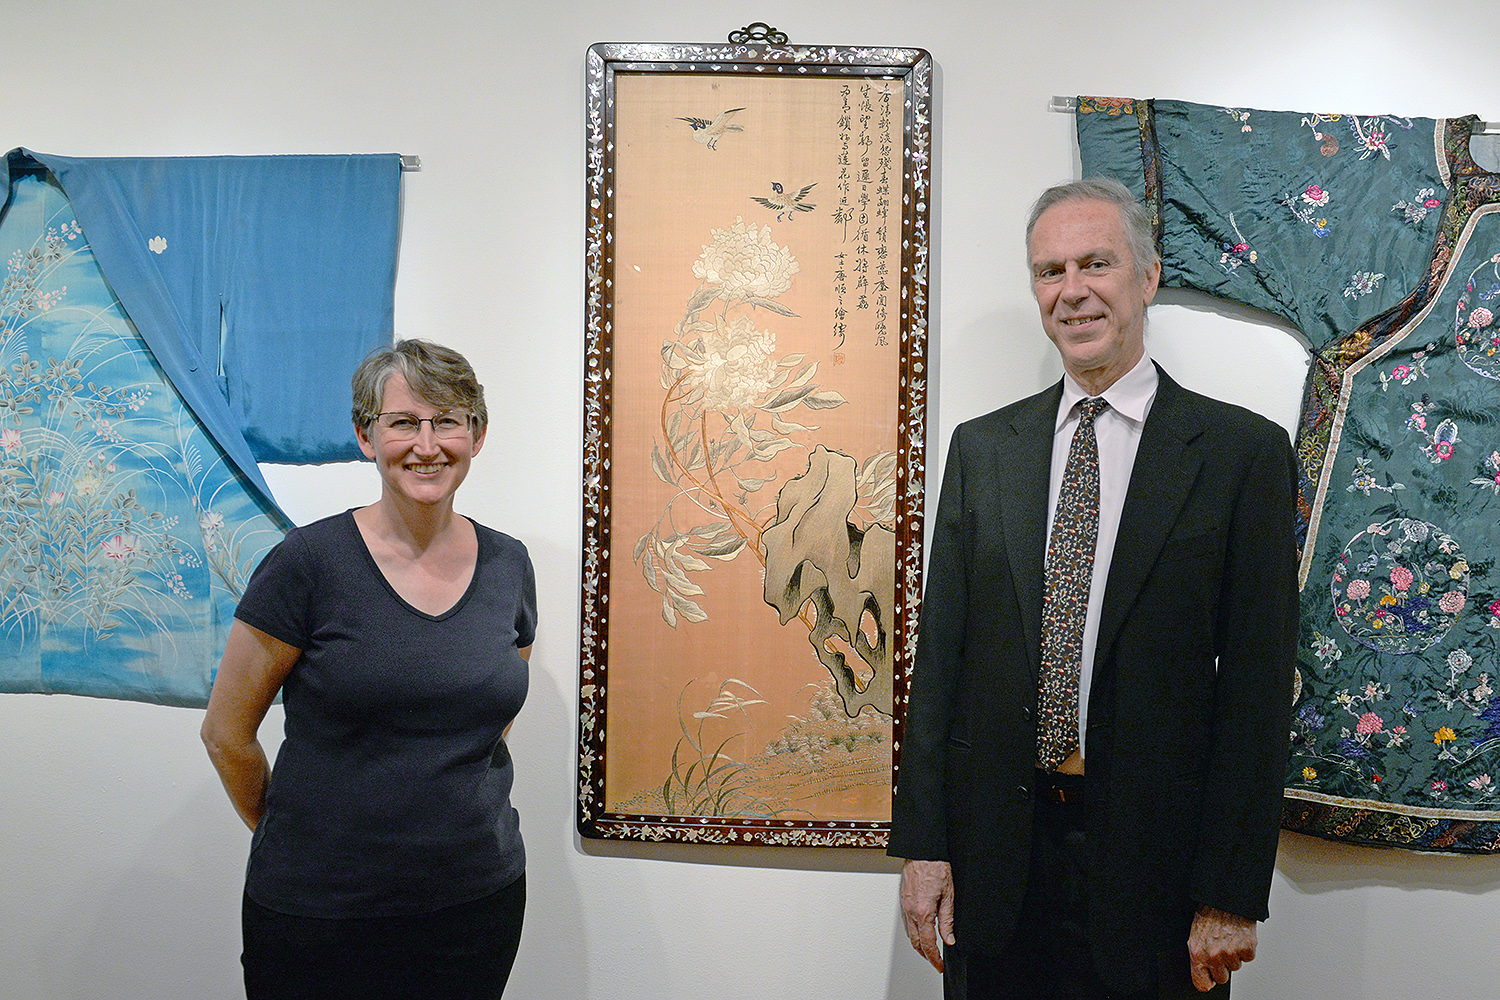 Clare Rogan, curator of the Davison Art Center, and Patrick Dowdey, curator of the Freeman Center for East Asian Studies stand near a silk embroidery titled “Peony (pre 1925)” from Southeast China. The artwork is framed in hardwood with a mother of pearl inlay. 